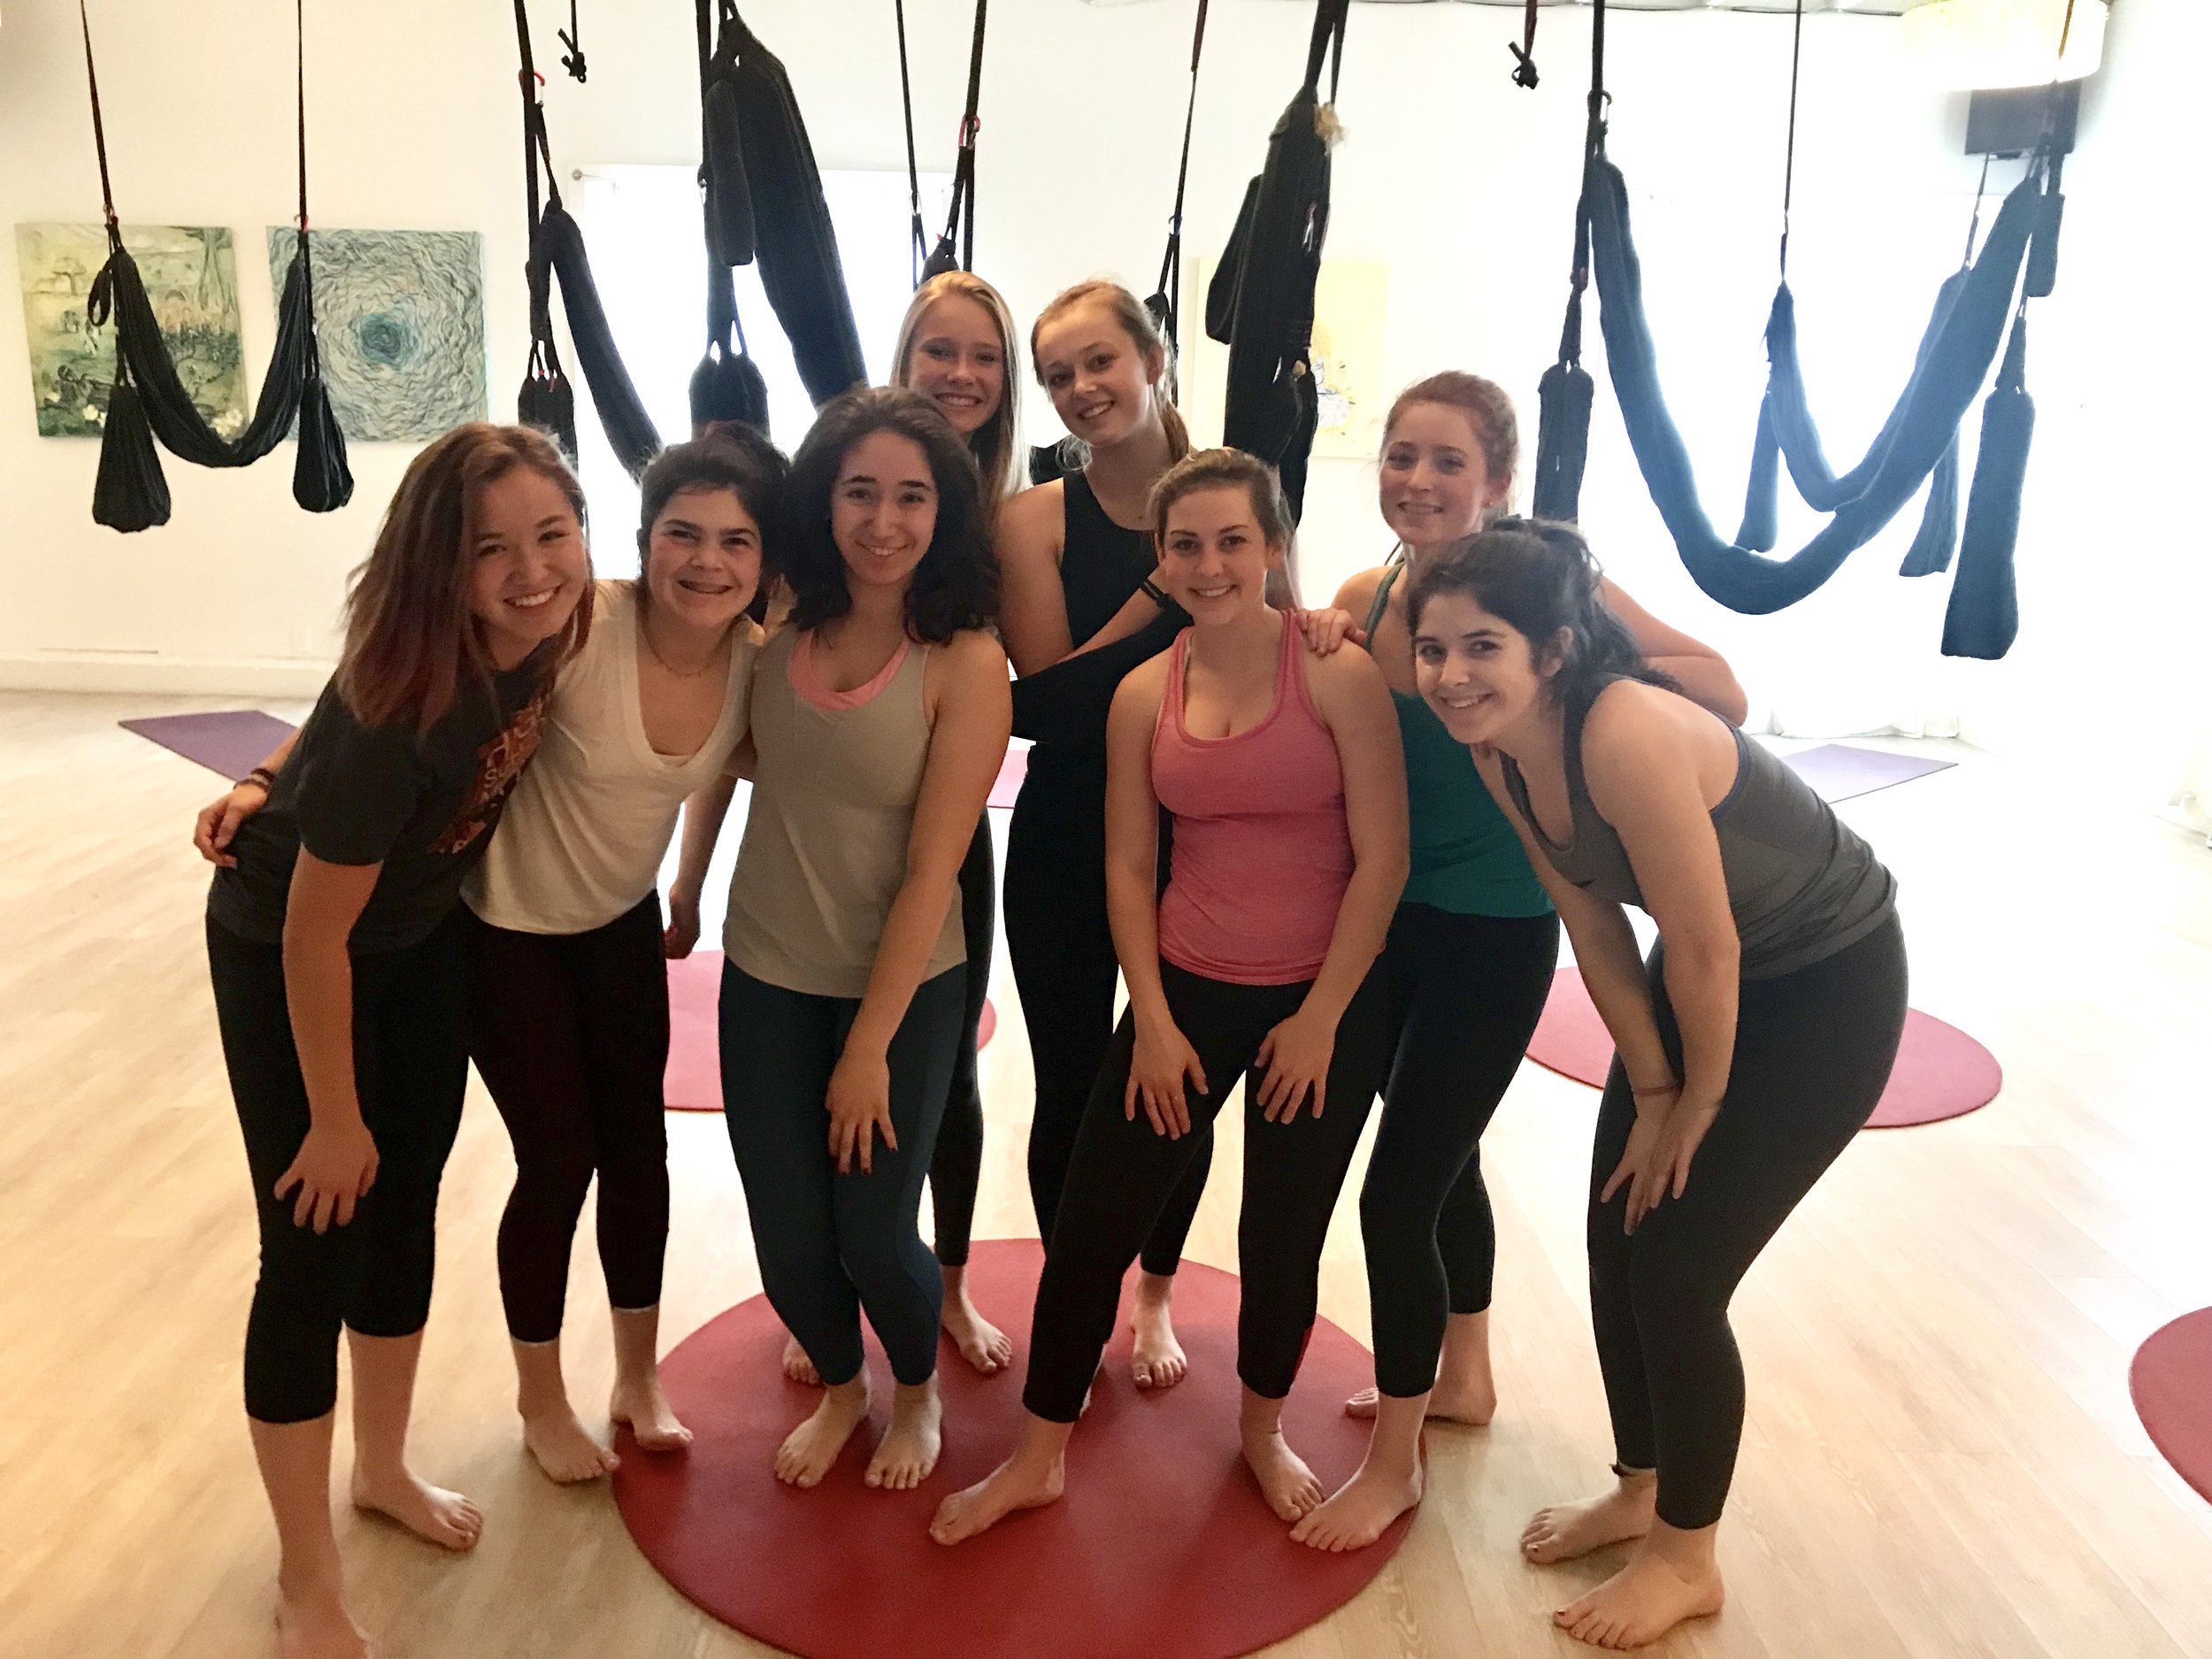 Teen Review: Aerial Yoga: Sacred Sky Yoga Should Be Your New Teen